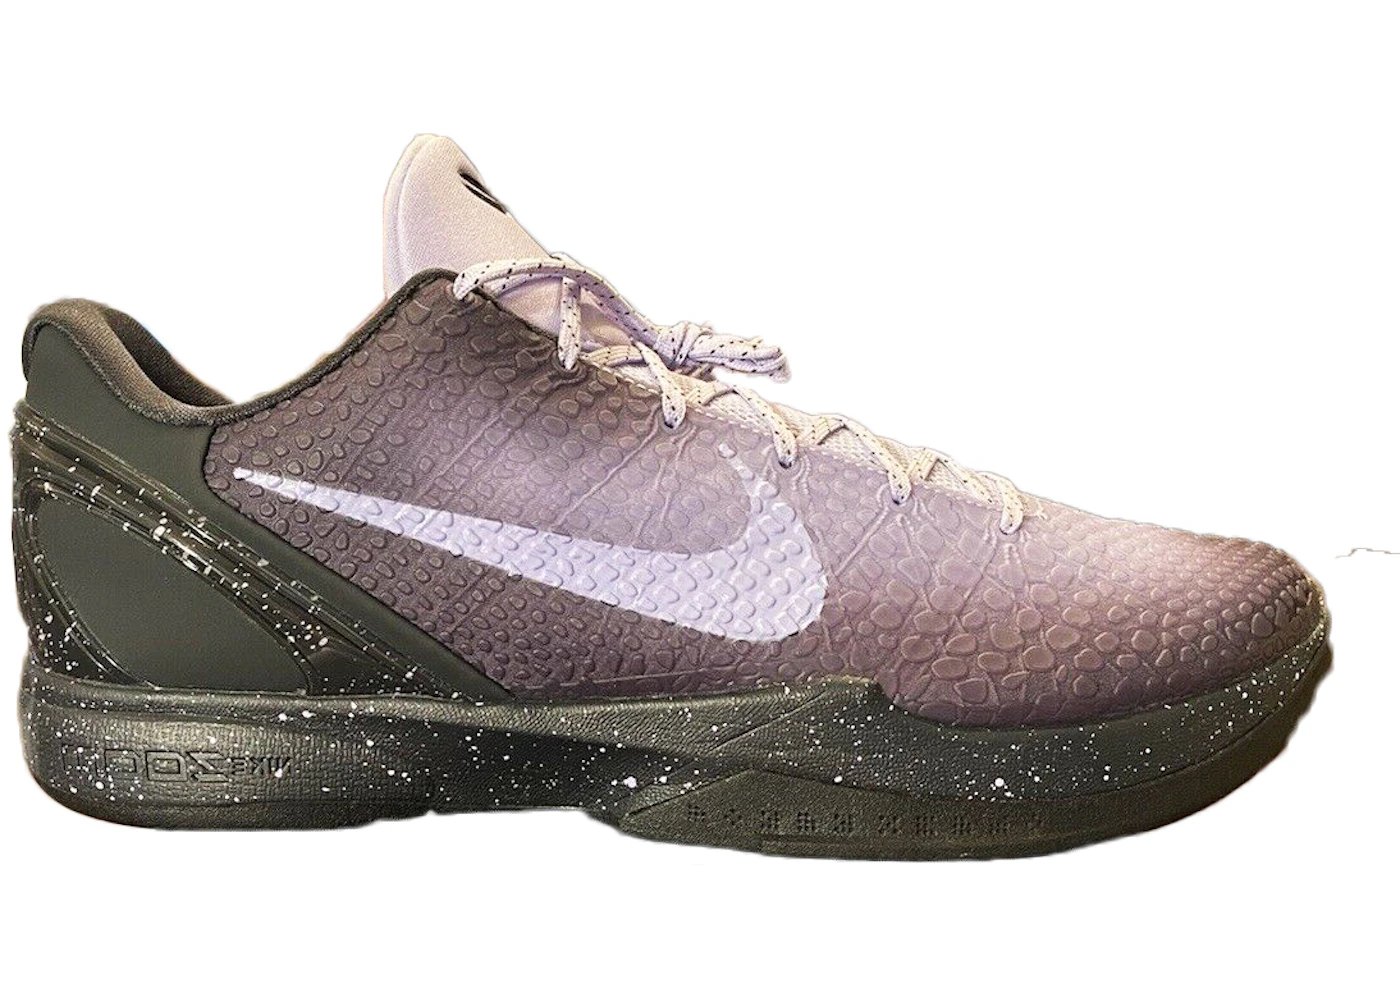 Explore The Impact Of Kobe 6 Eybl: A Sneaker Review